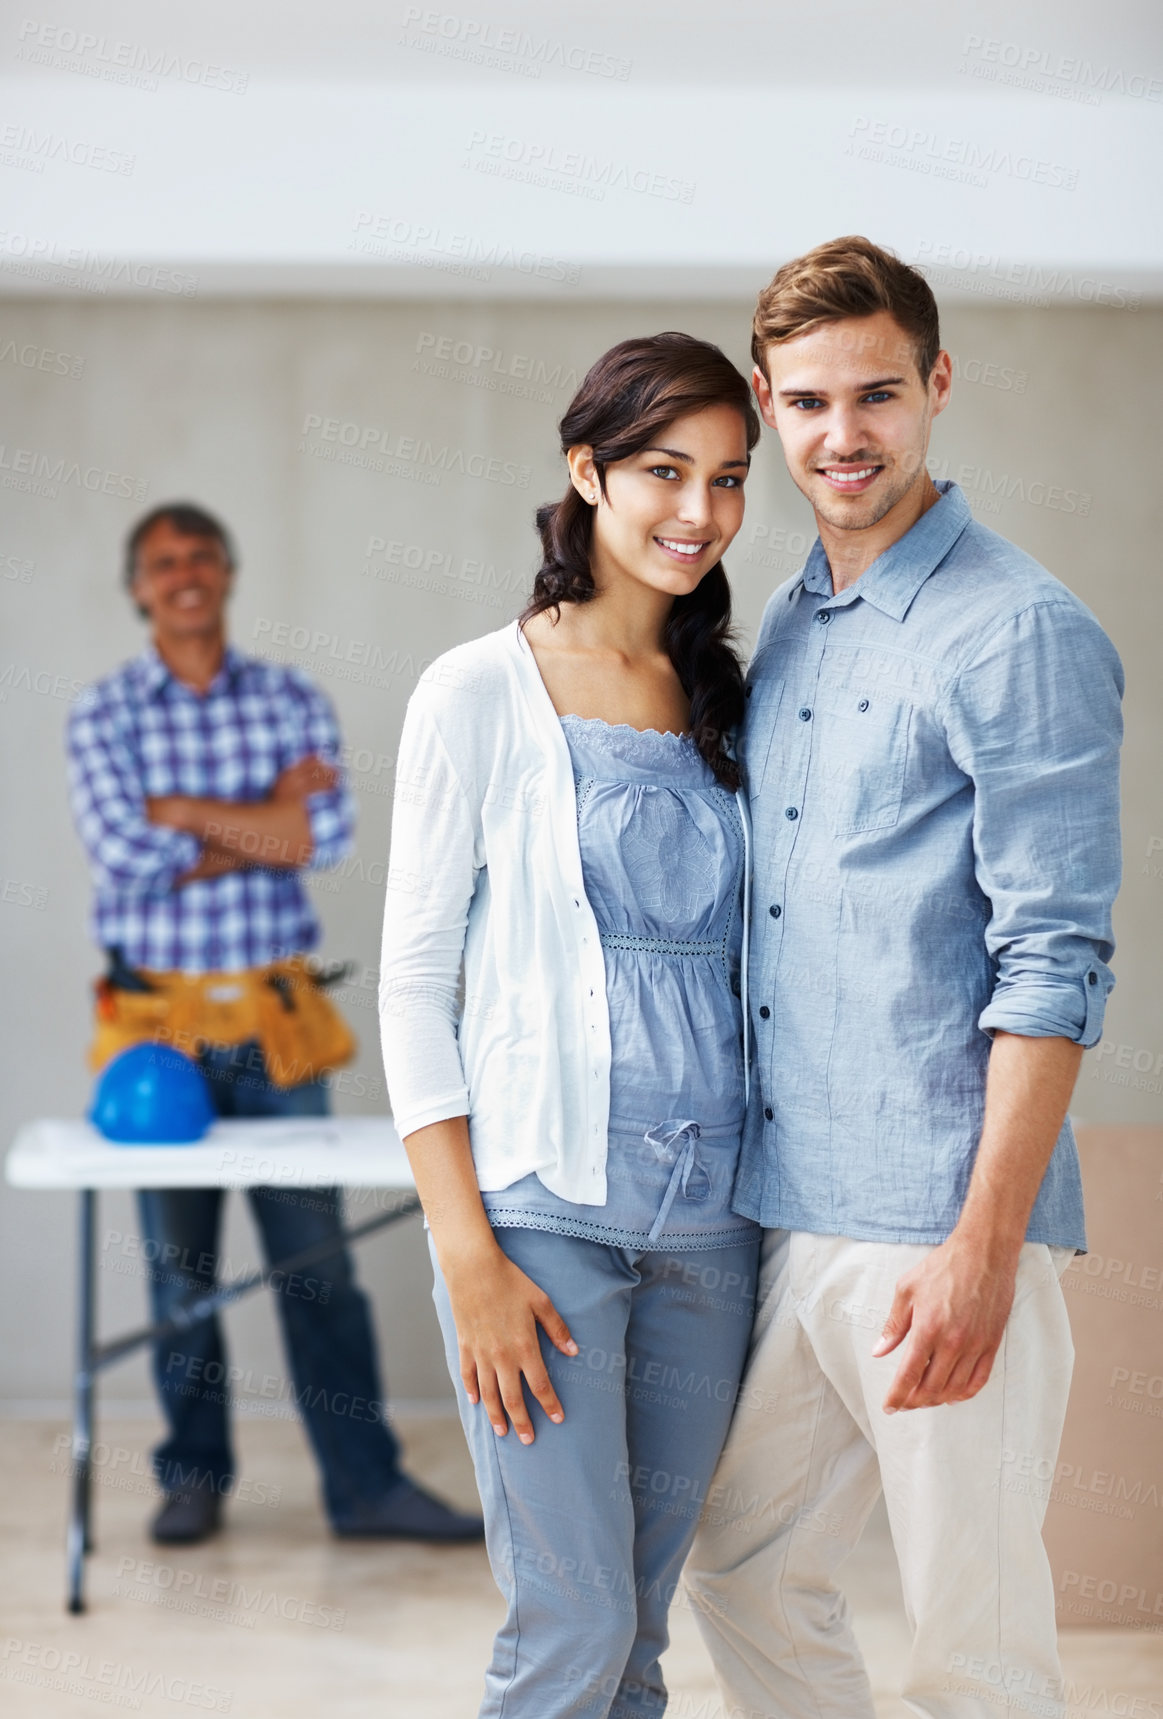 Buy stock photo Portrait of beautiful young couple smiling together with architect in background